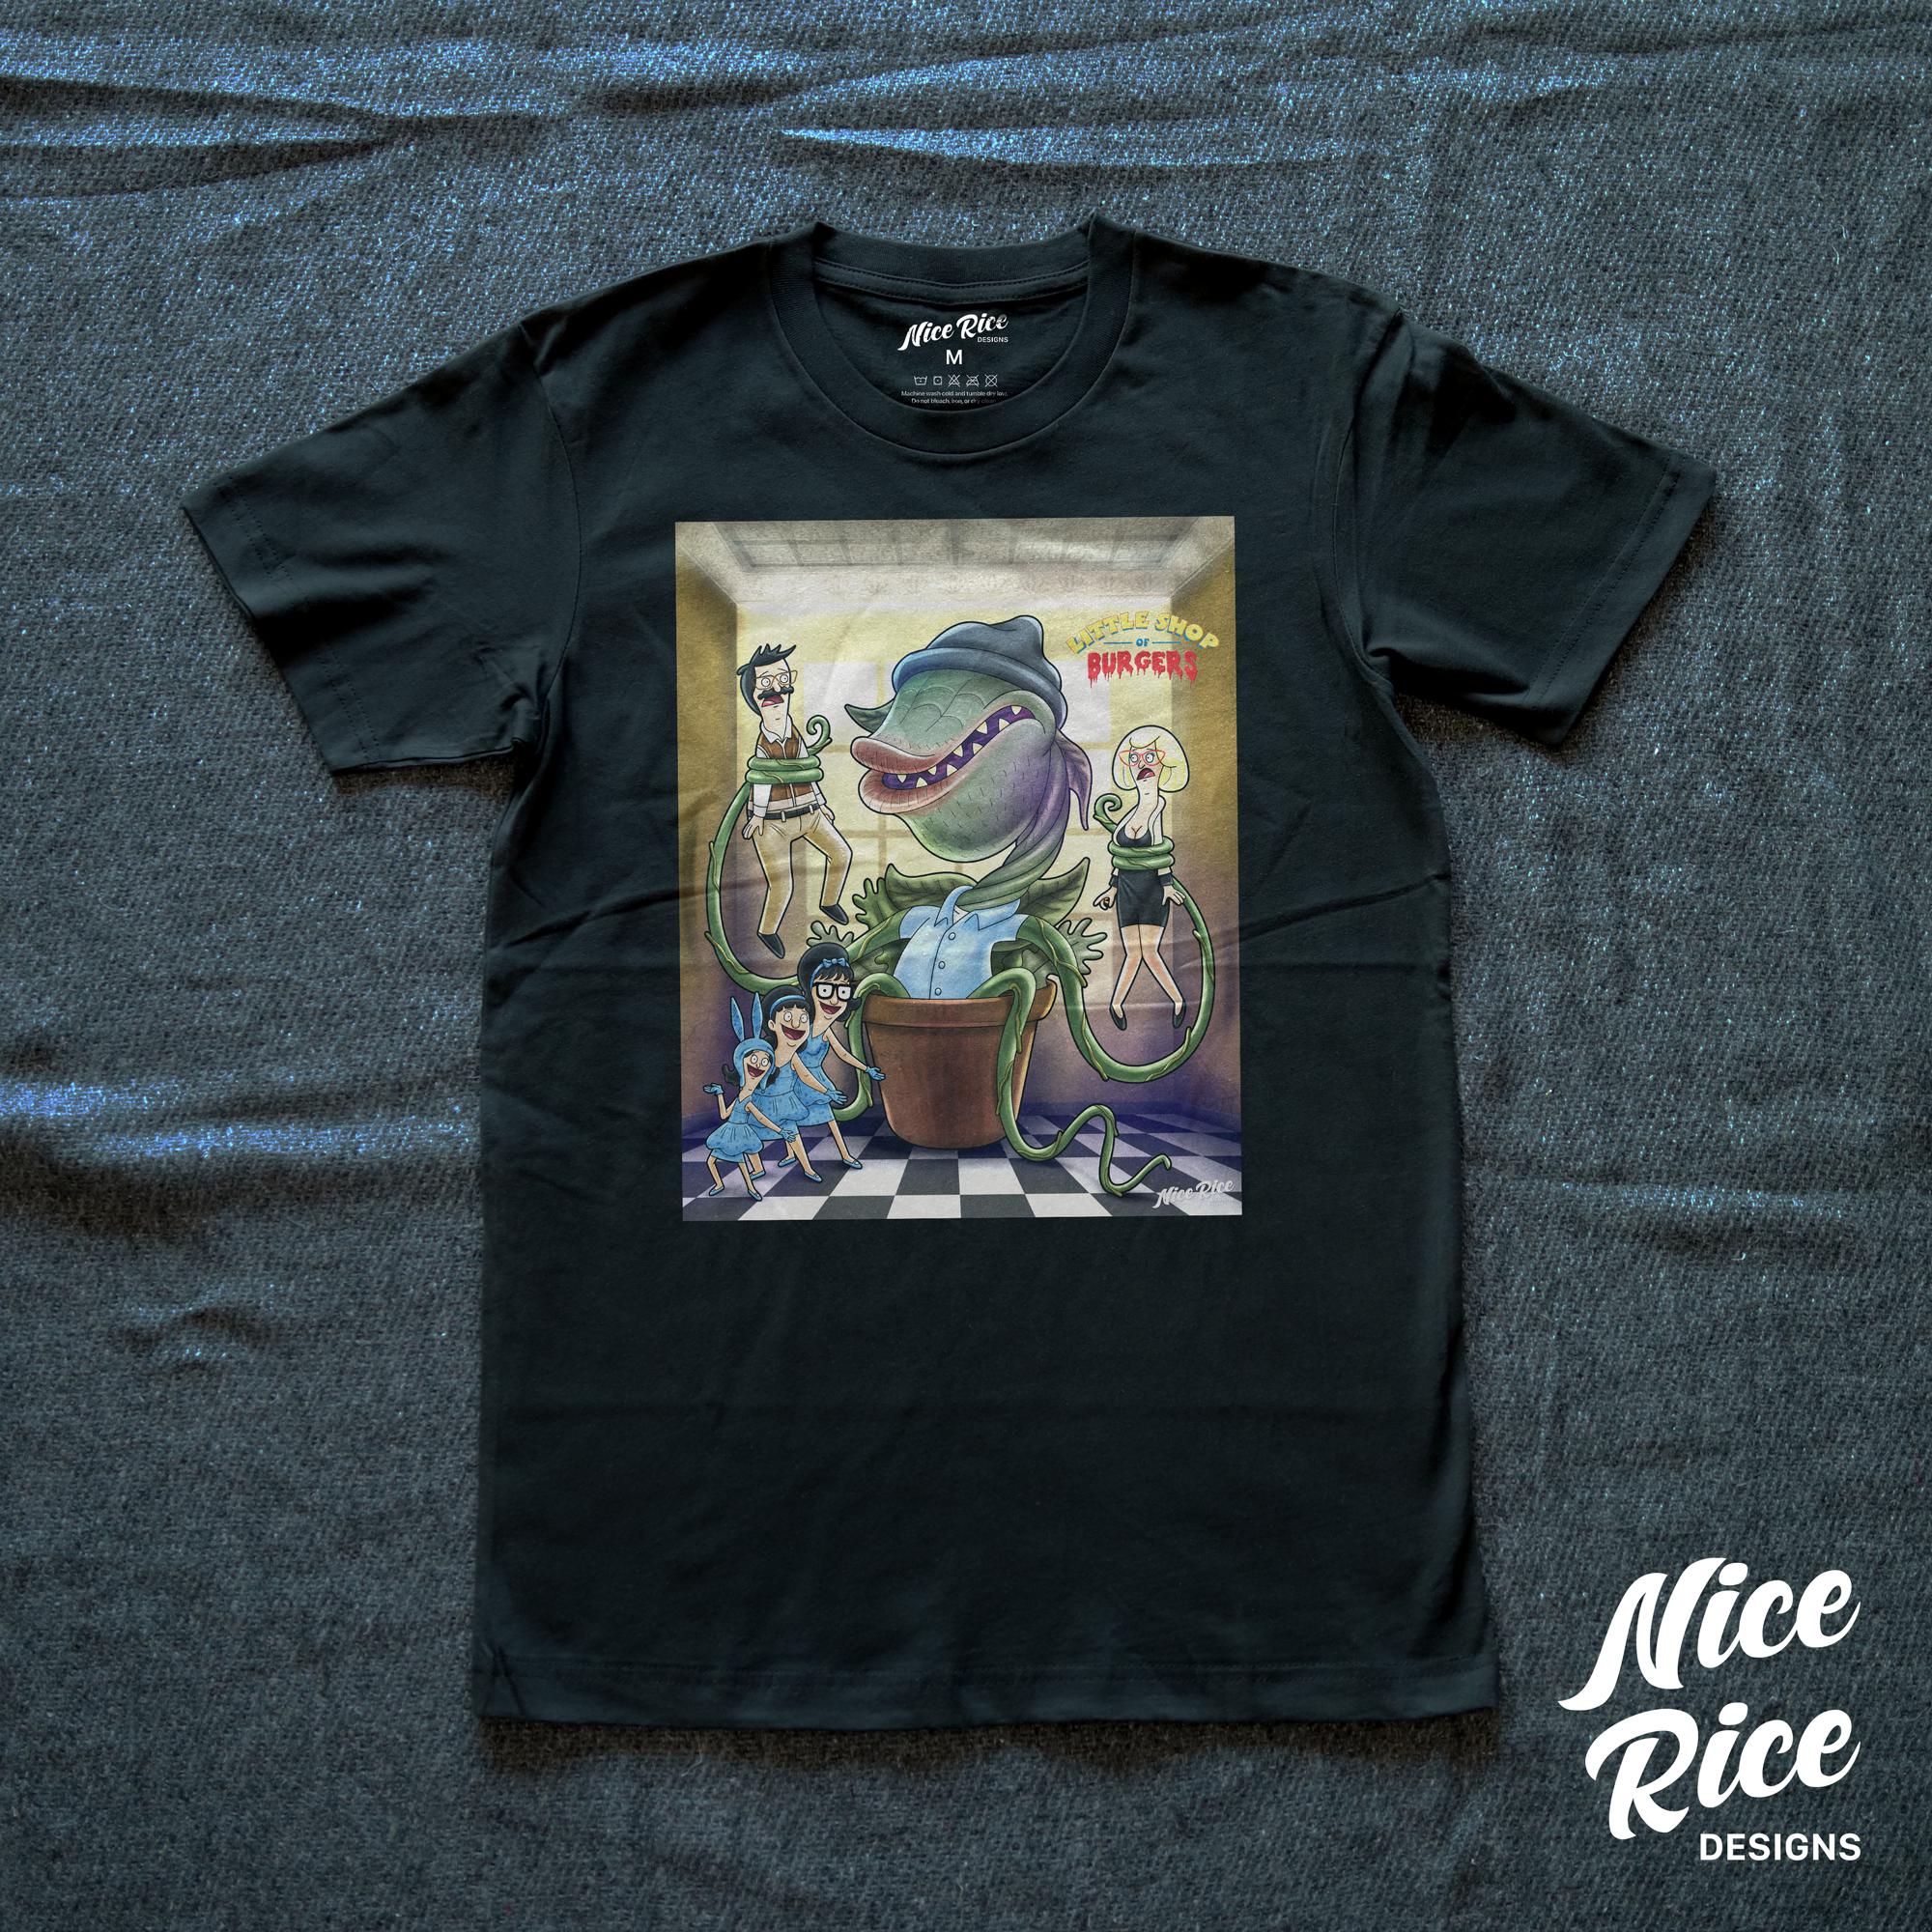 Little Shop of Burgers Shirt by Nice Rice Designs